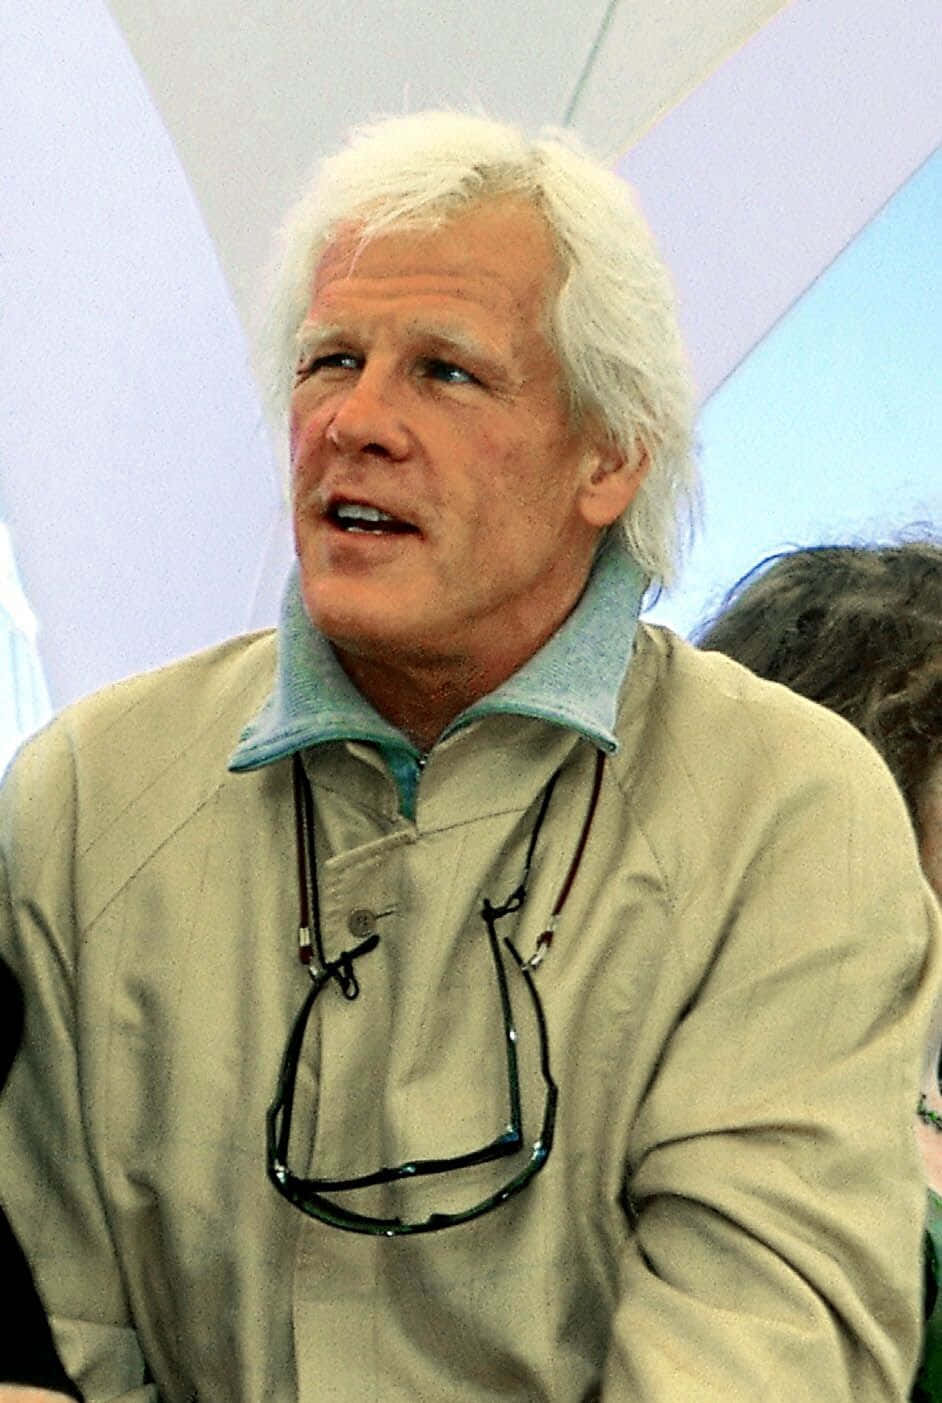 Nick Nolte posing for a promotional photo. Wallpaper